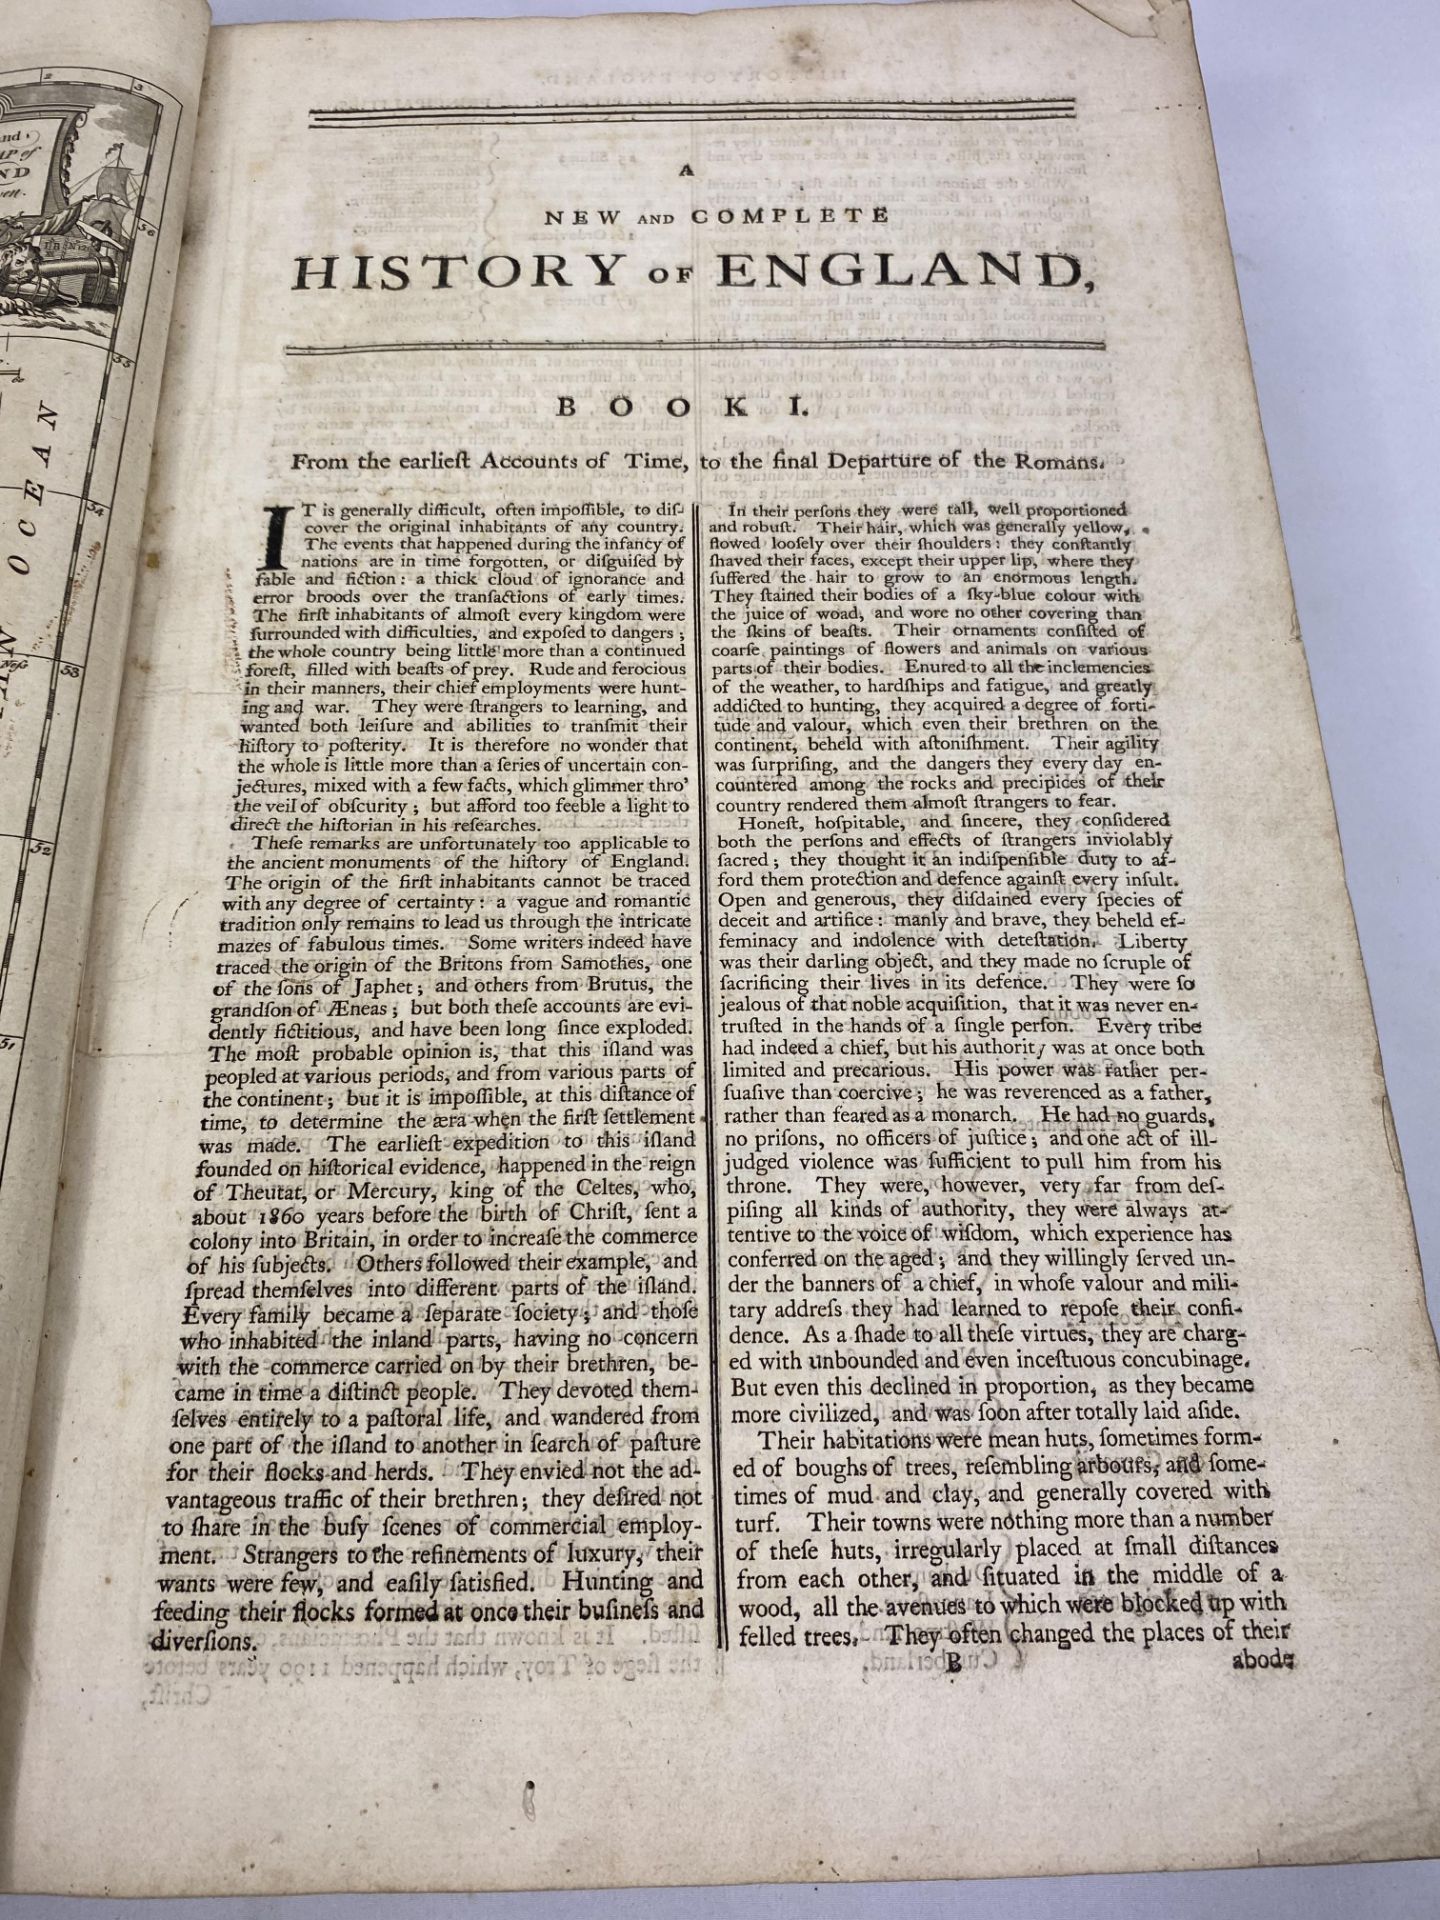 A New and Complete History of England by Temple Sydney, printed for J. Cooke 1773 - Image 5 of 6